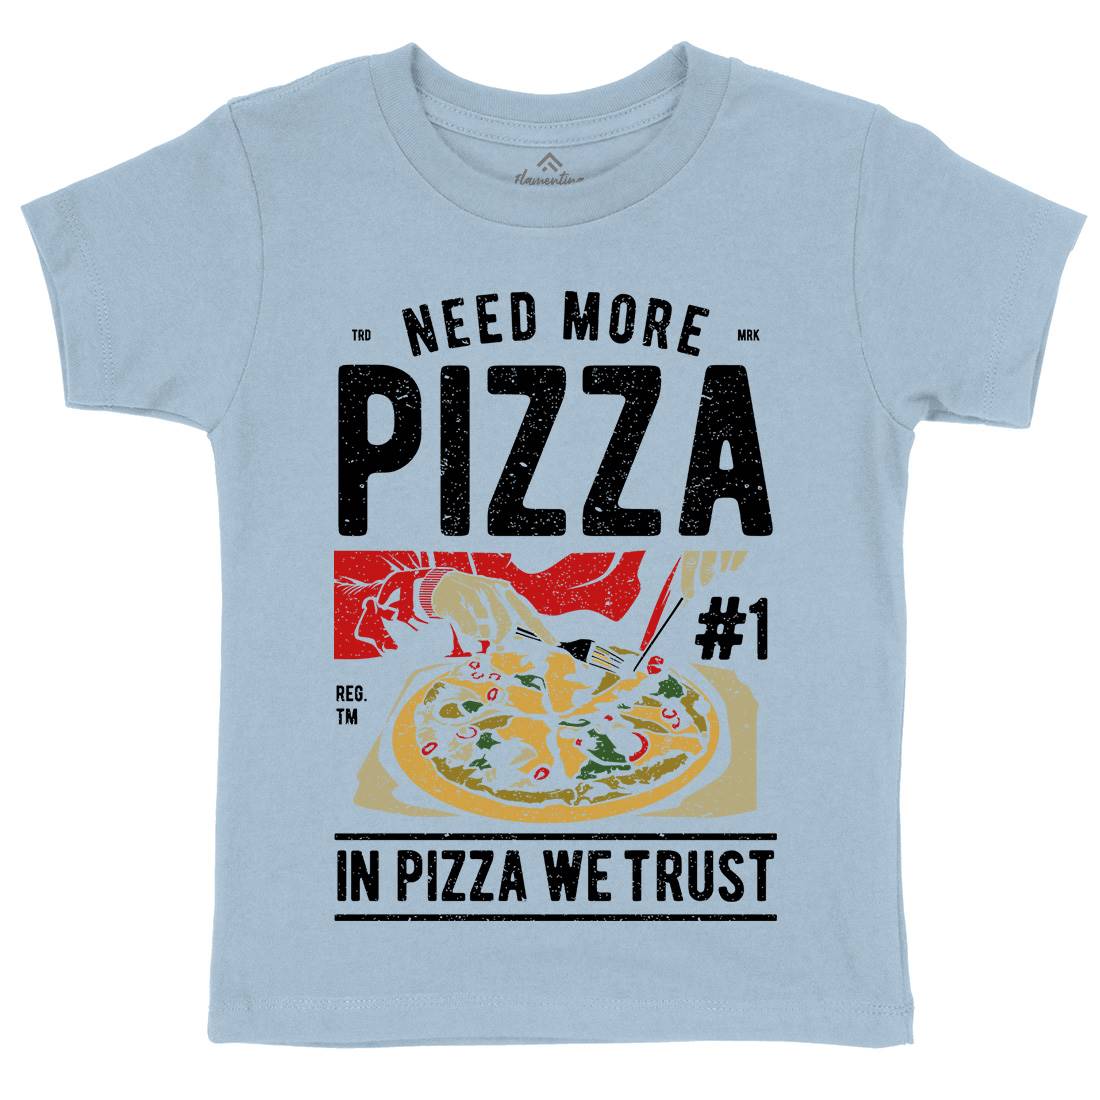 Need More Pizza Kids Crew Neck T-Shirt Food A727